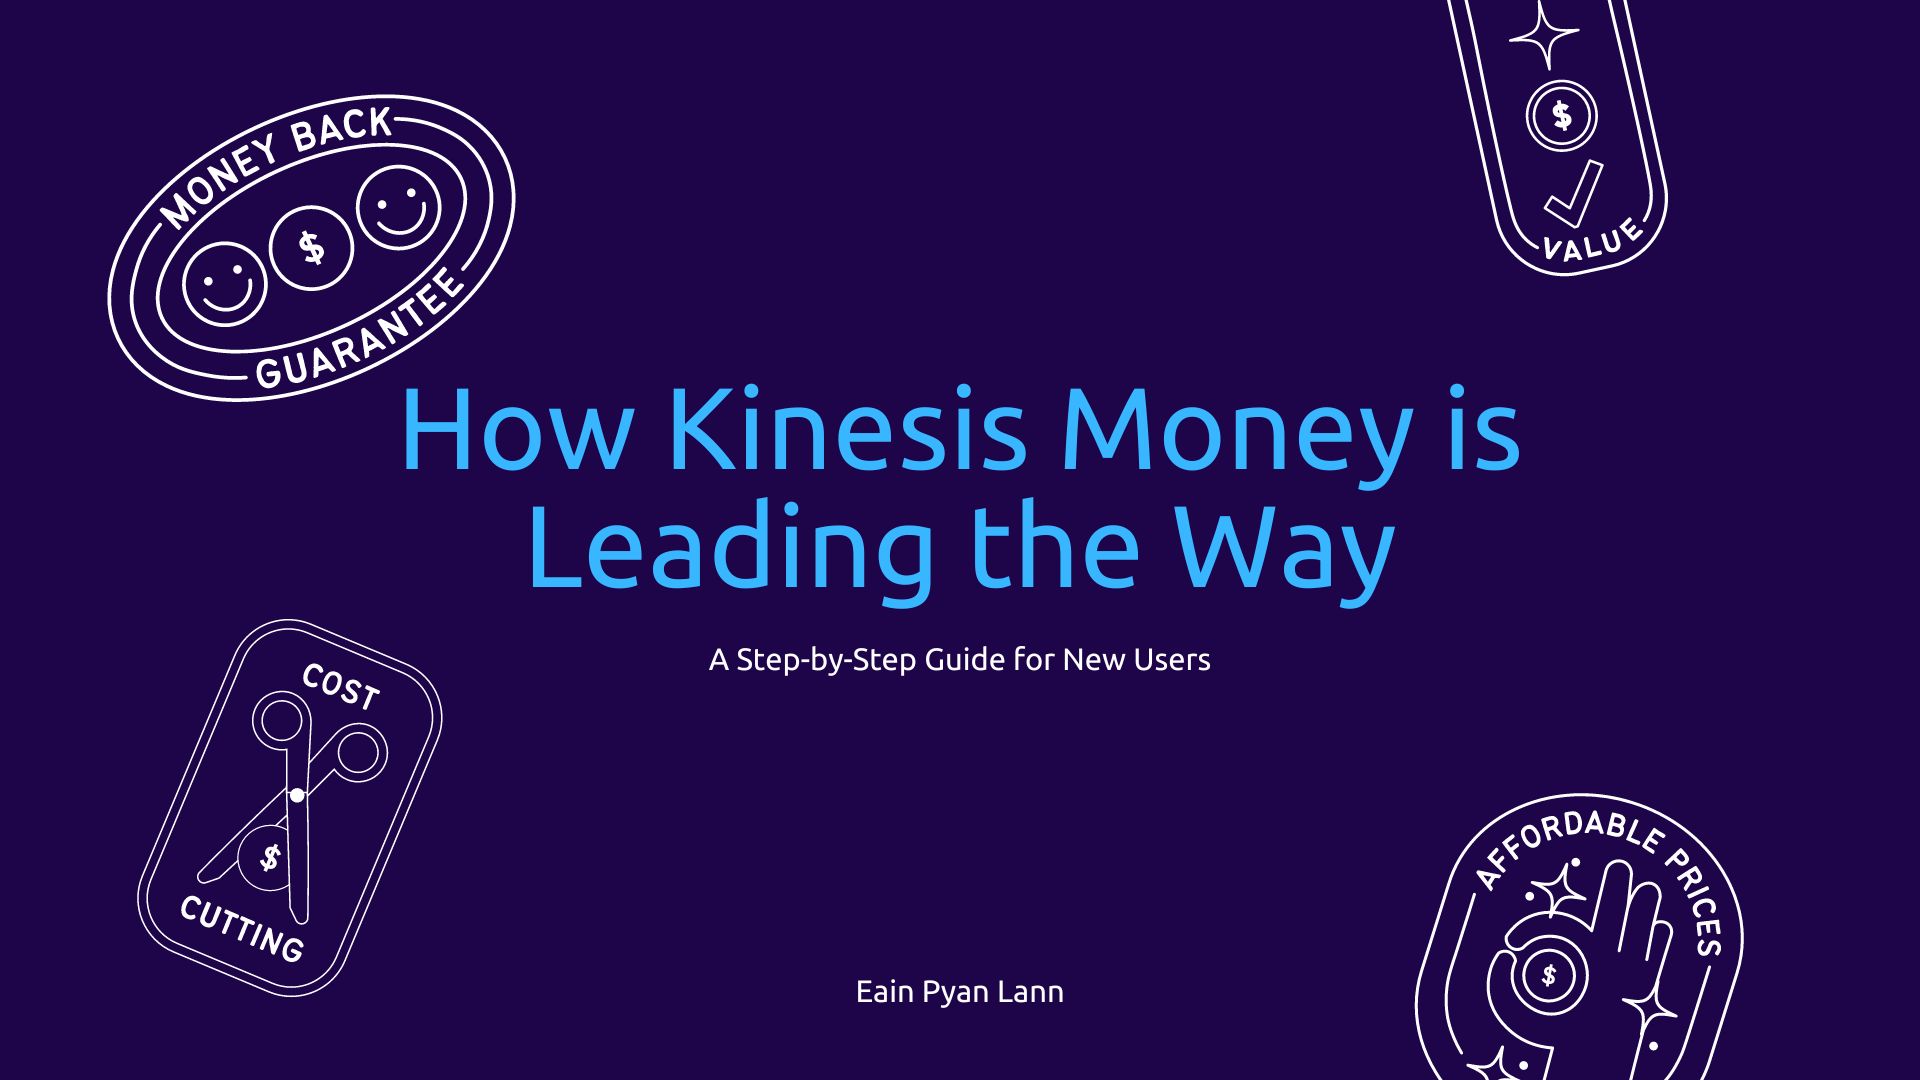 How Kinesis Money is Leading the Way